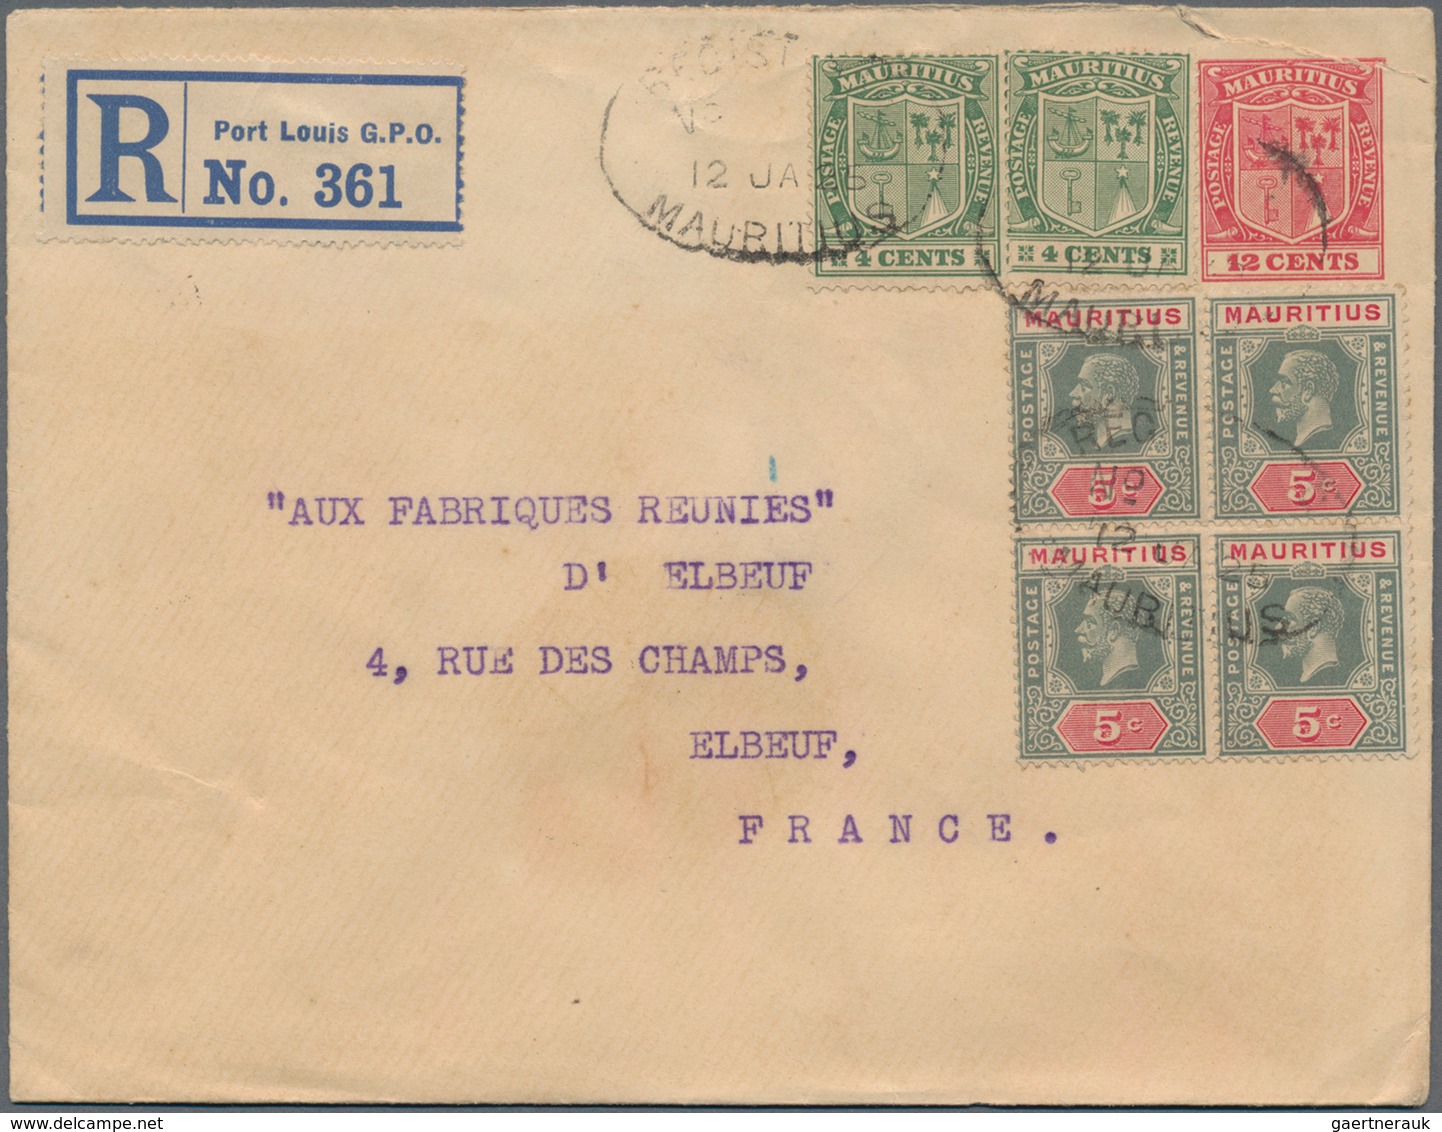 Mauritius: 1860's-1920's POSTAL STATIONERY: Collection of 32 postal stationery cards, envelopes and